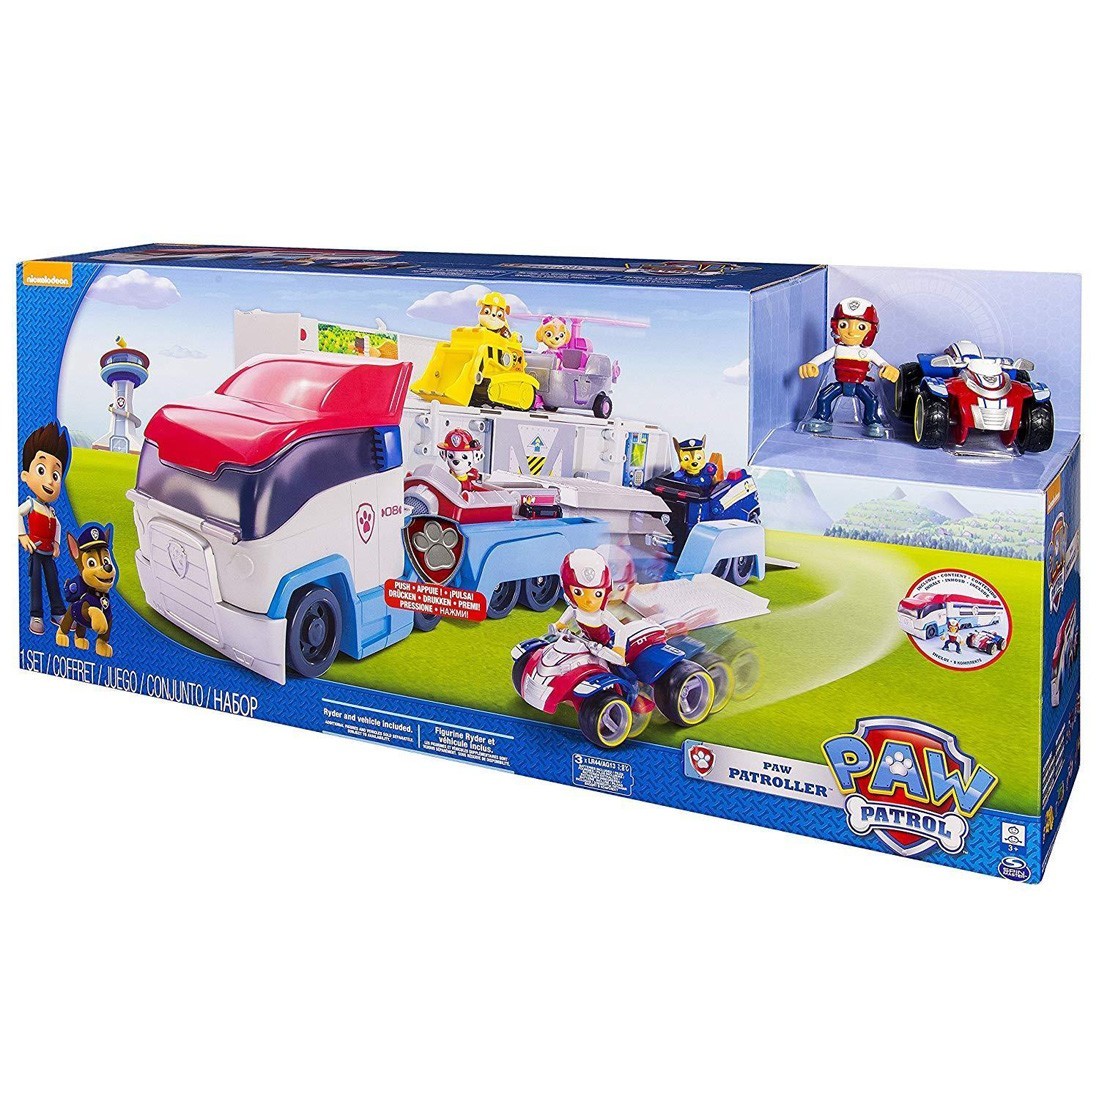 Buy Paw Patrol Paw Patroller - Spin Master, delivered to your home | The  Outfit